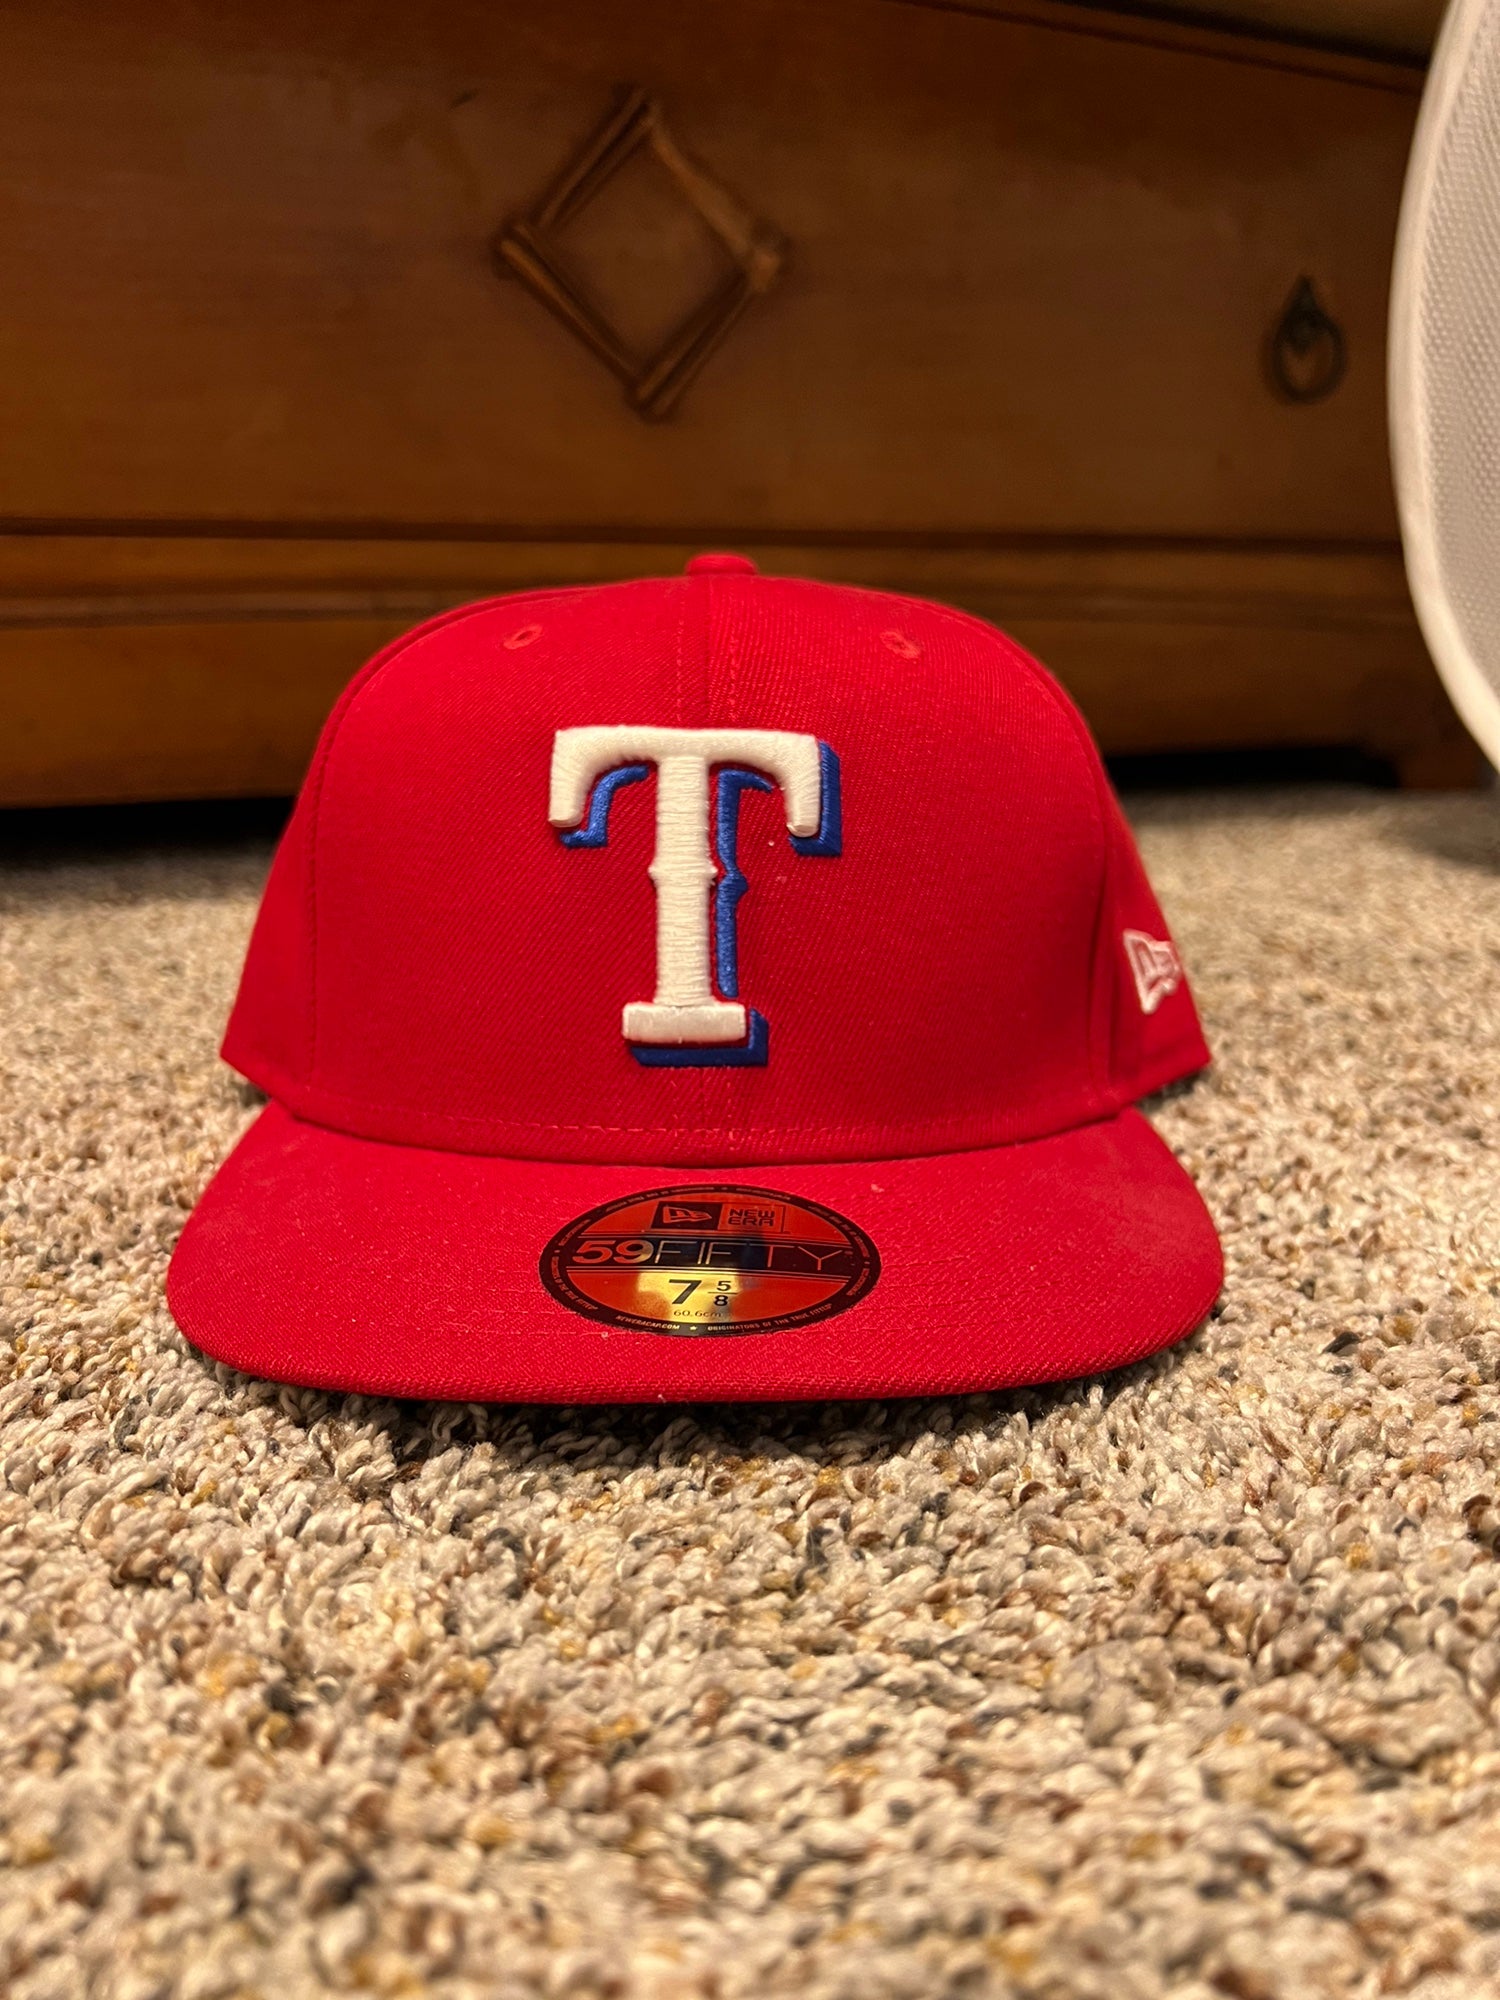 New Era 59FIFTY Real Facts Texas Rangers Texas Flag Patch Hat - Gold, Brown Gold/Brown / 7 5/8